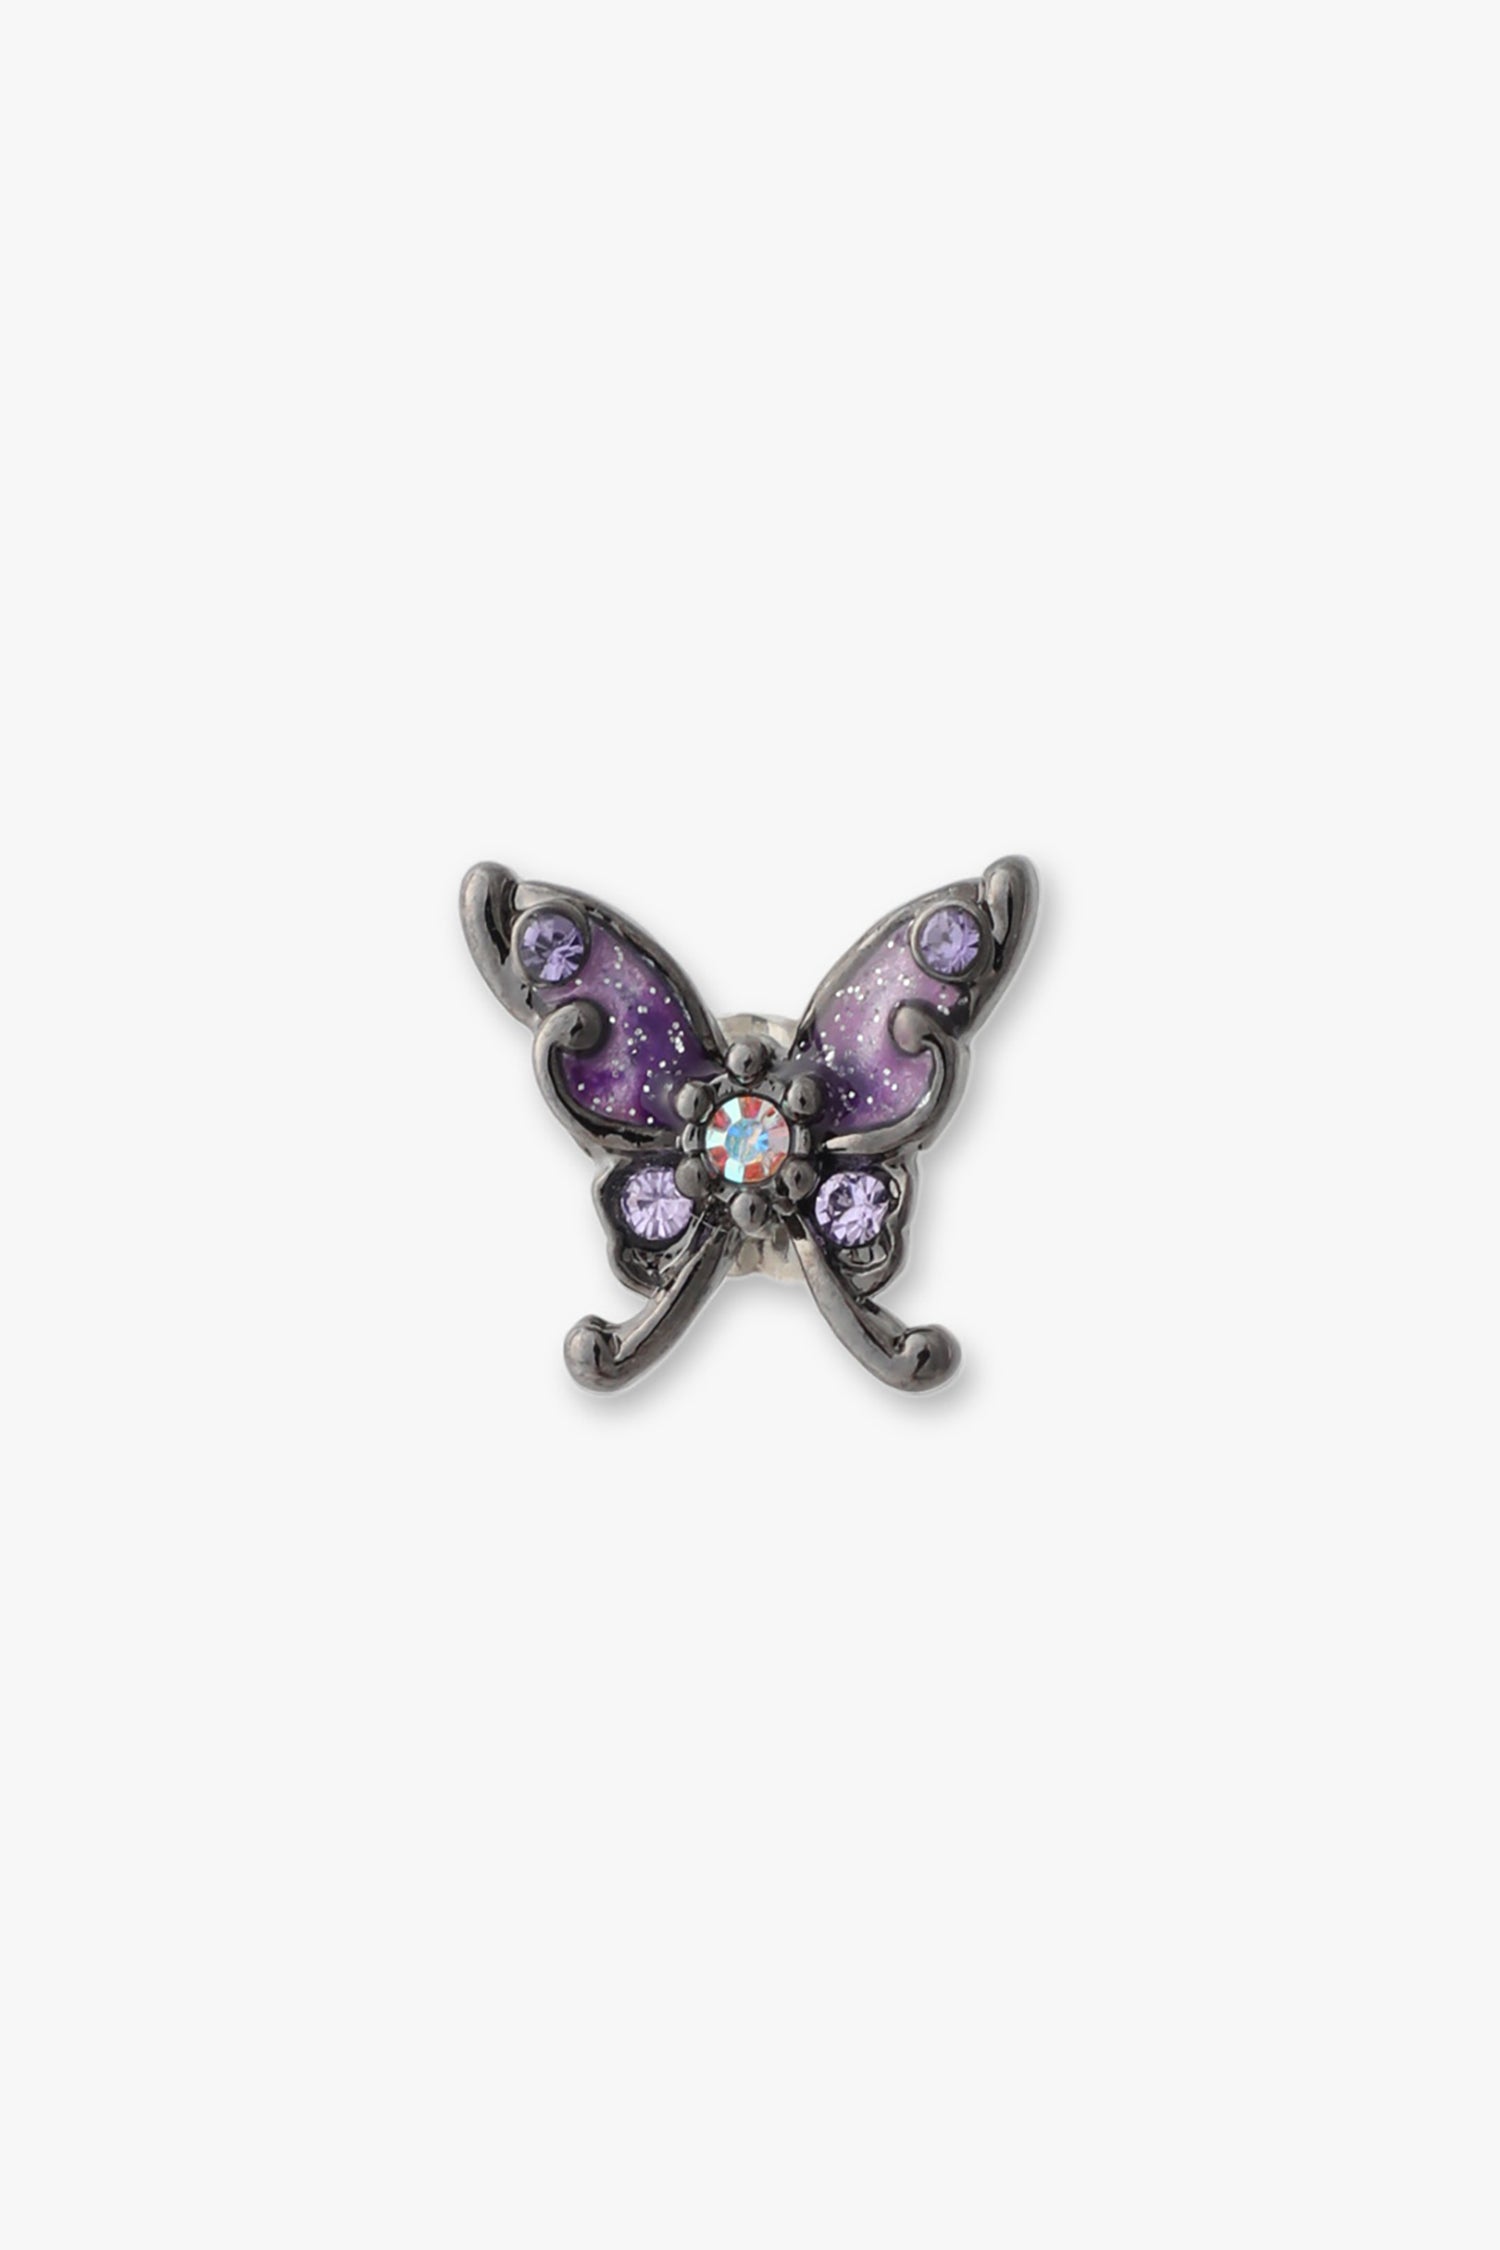 Butterfly Earrings Black rounded borders, Purple Butterfly with Gems, large round gem at center